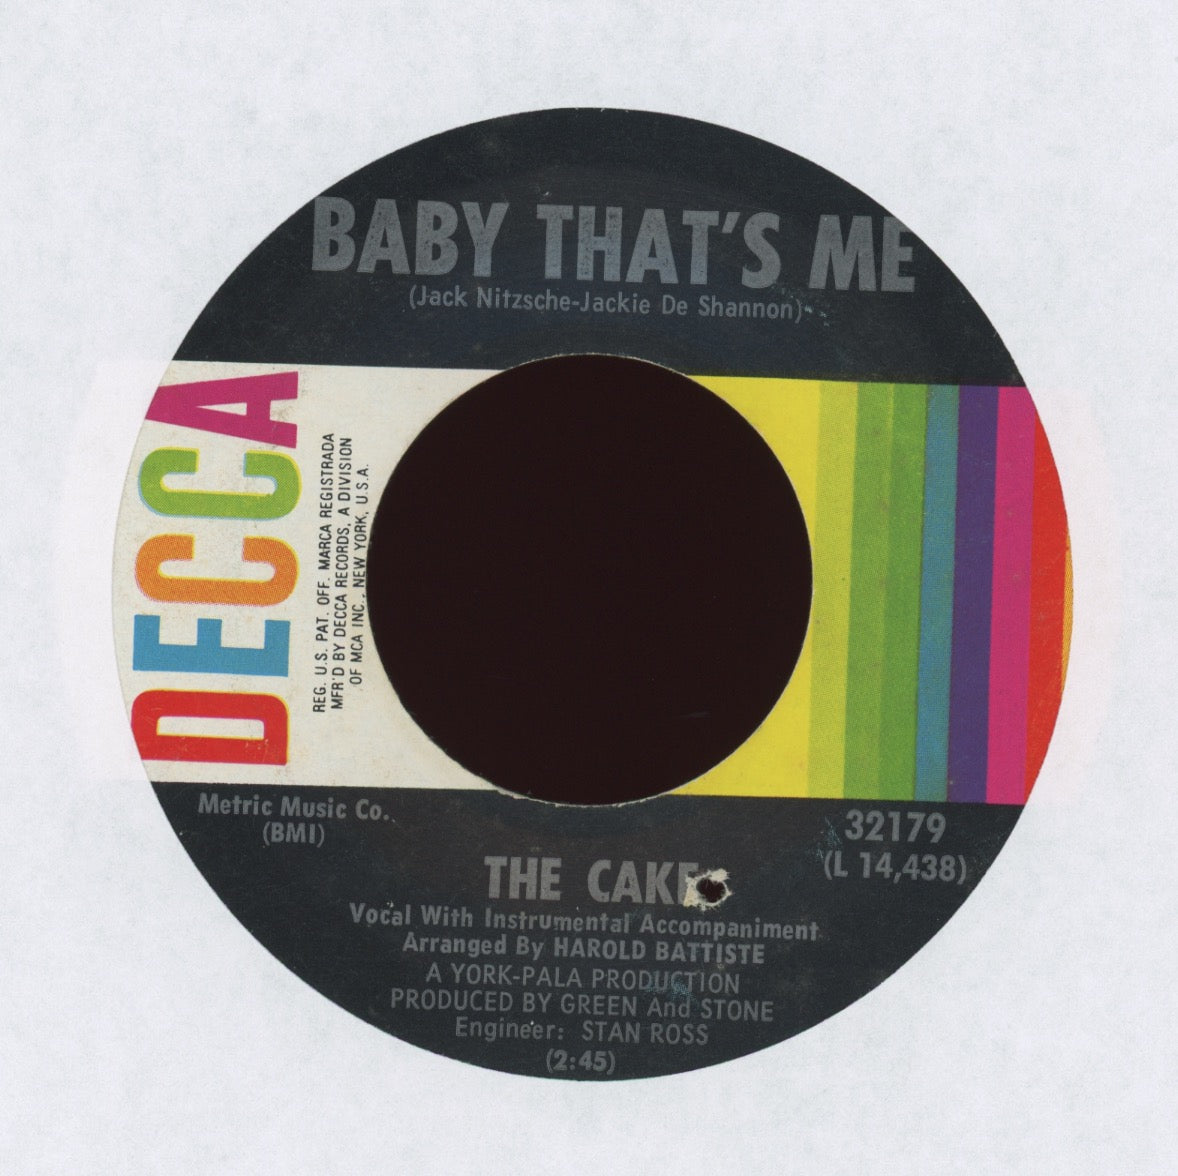 The Cake - Baby That's Me on Decca